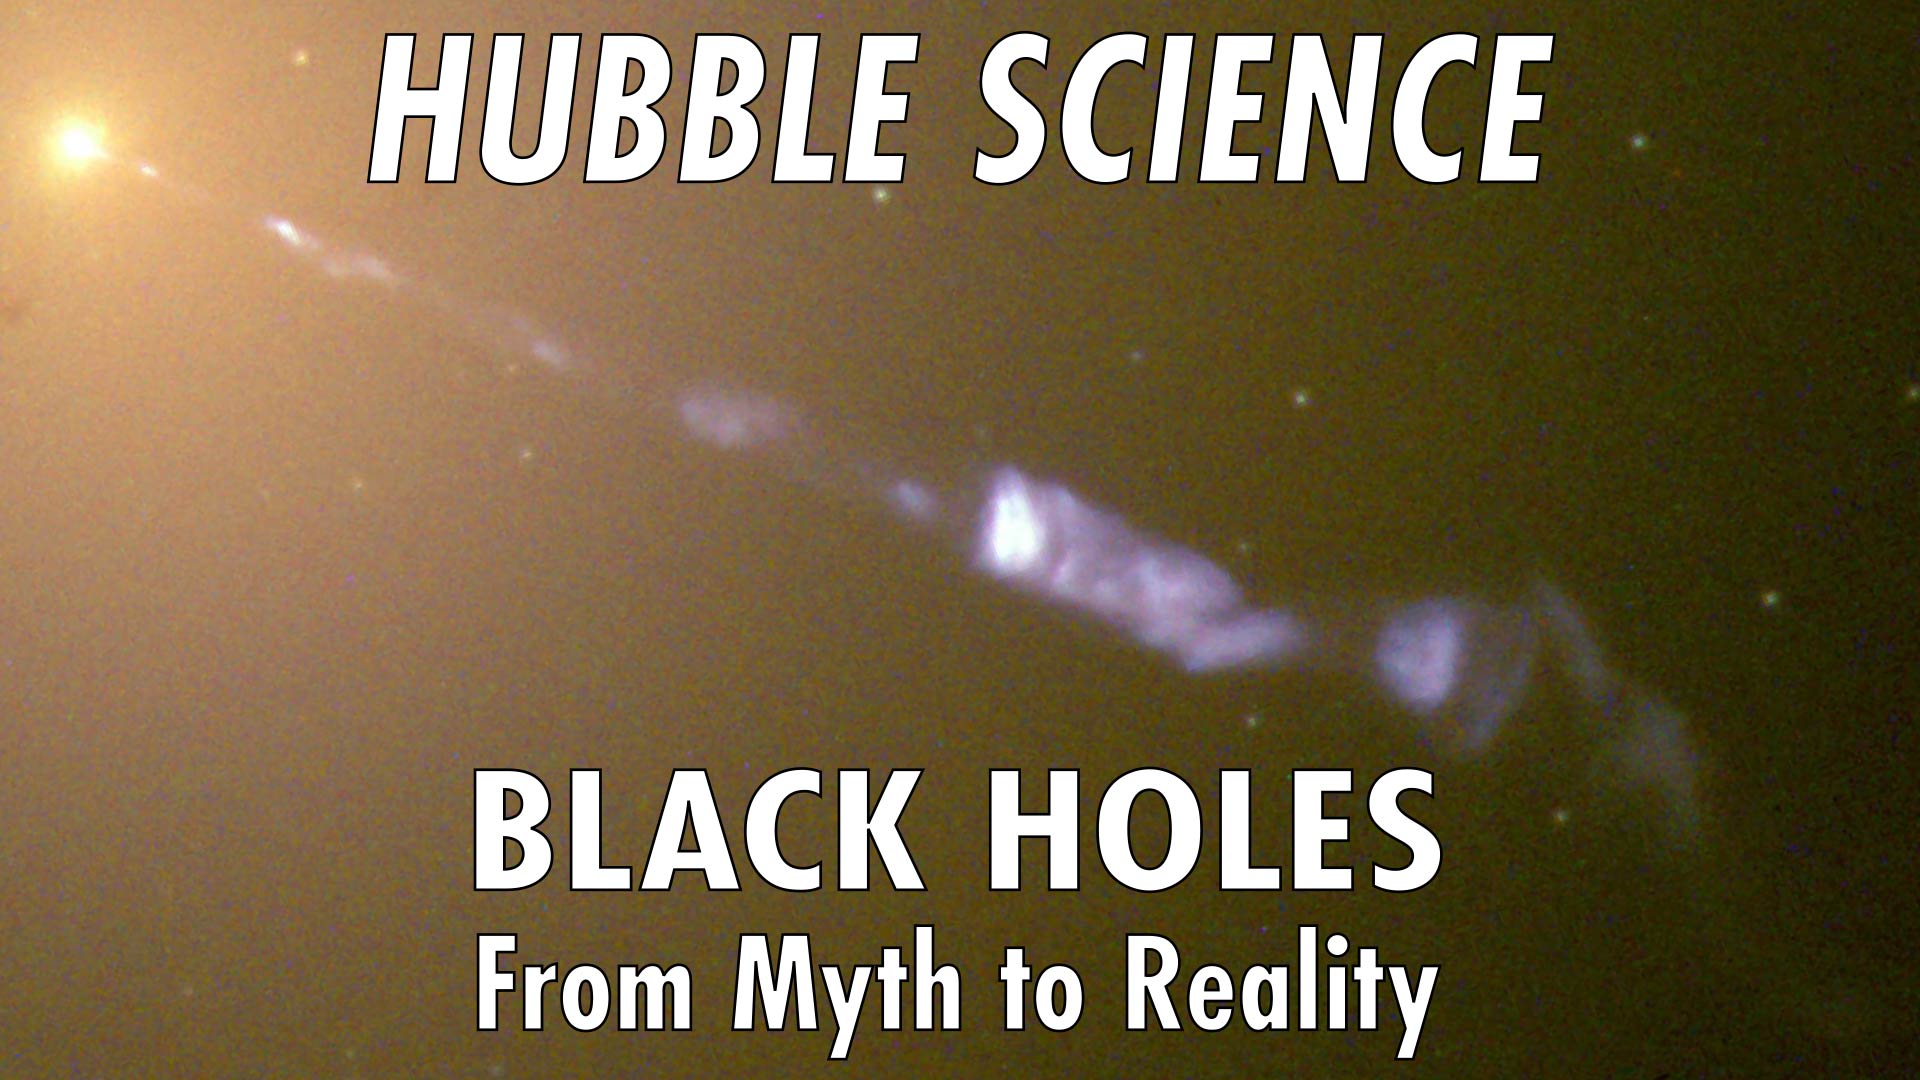 Preview Image for Hubble Science: Black Holes, From Myth to Reality